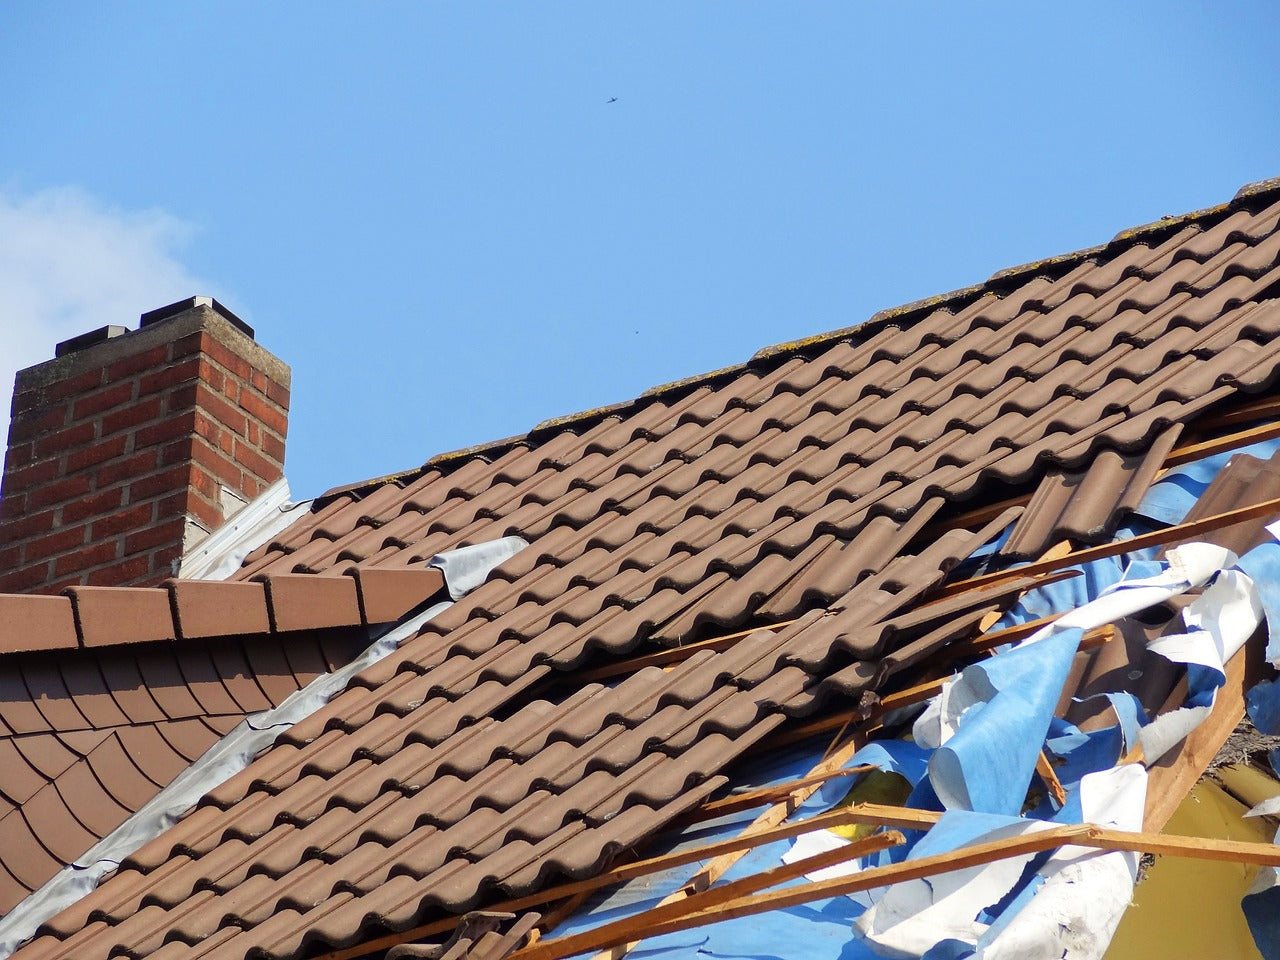 How to Choose the Right Roofing Contractor: Tips and Red Flags